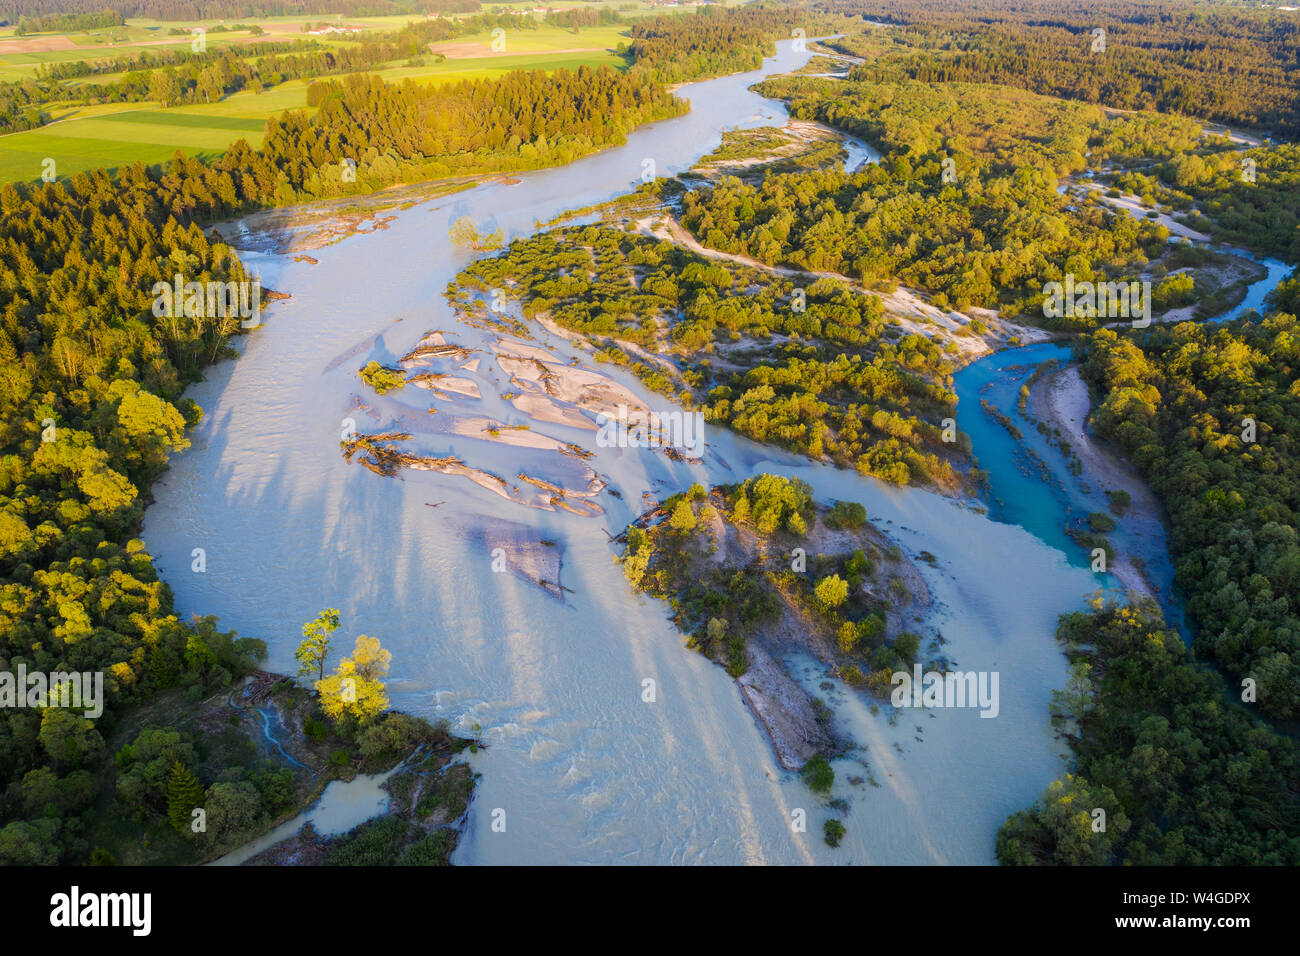 Aerial view of Isar river, high water, near Geretsried, Upper Bavaria, Germany Stock Photo